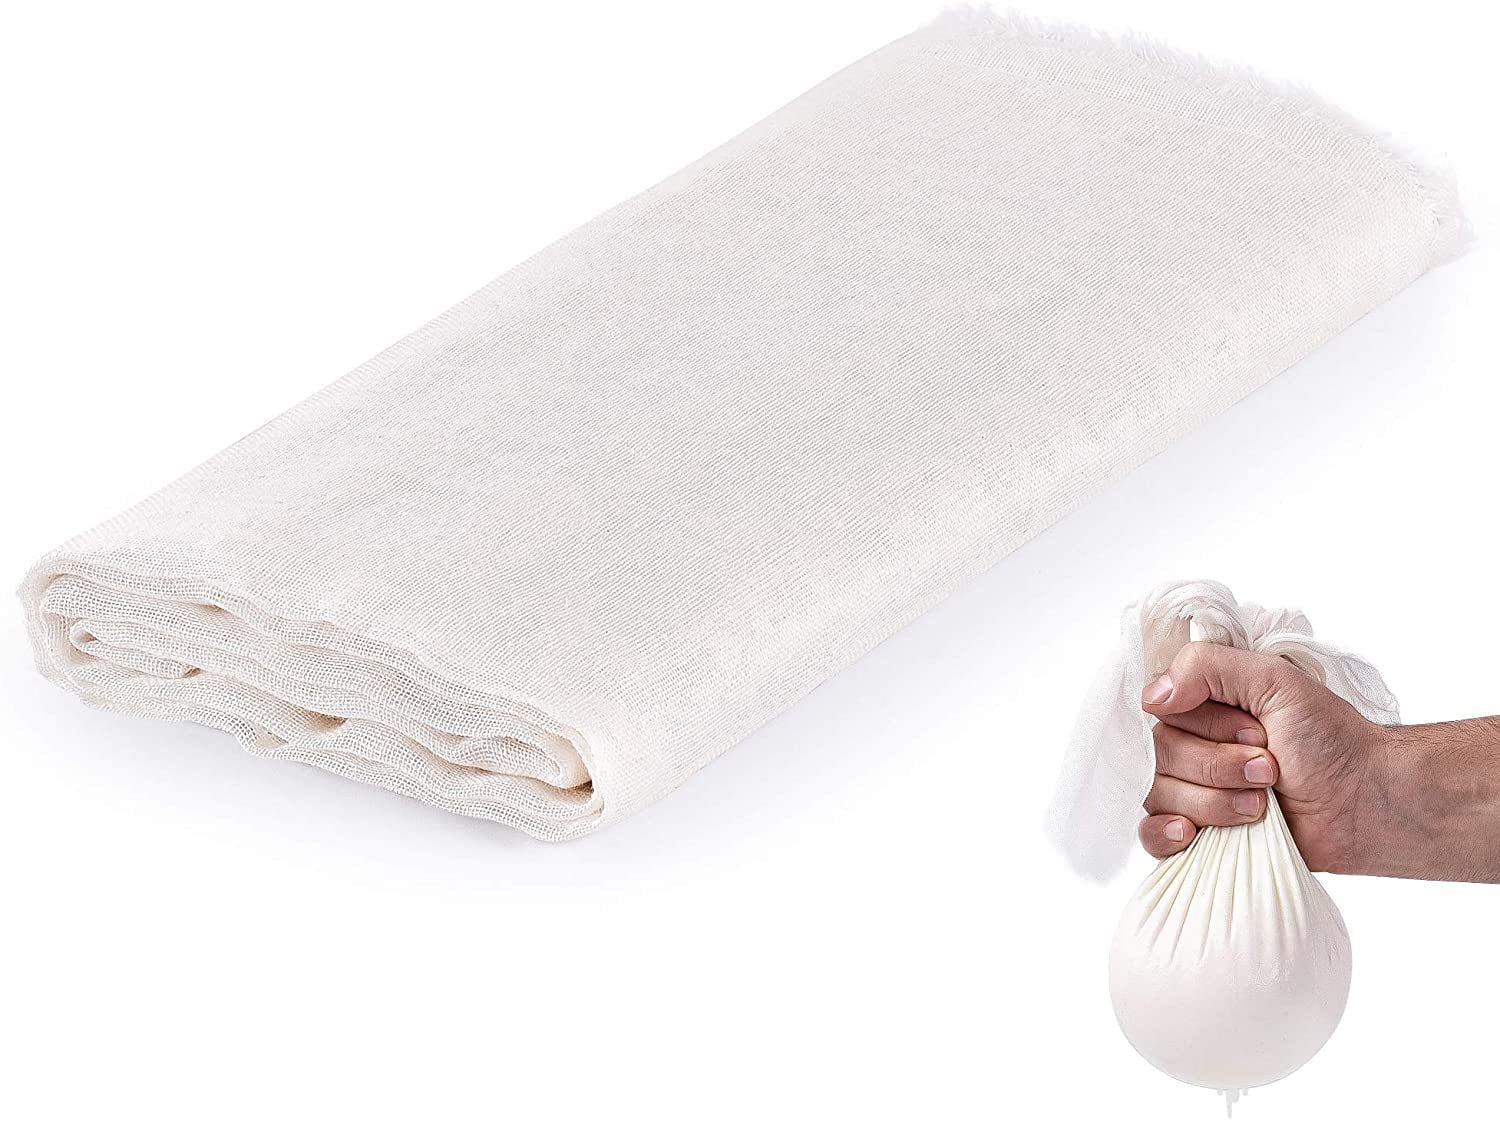 XelNaga 5 Pack Cheesecloth Reusable for Straining, 100% Unbleached Pure Cotton Muslin Cloths, Soft Square Cheese Clothes Weave Fabric Filter for